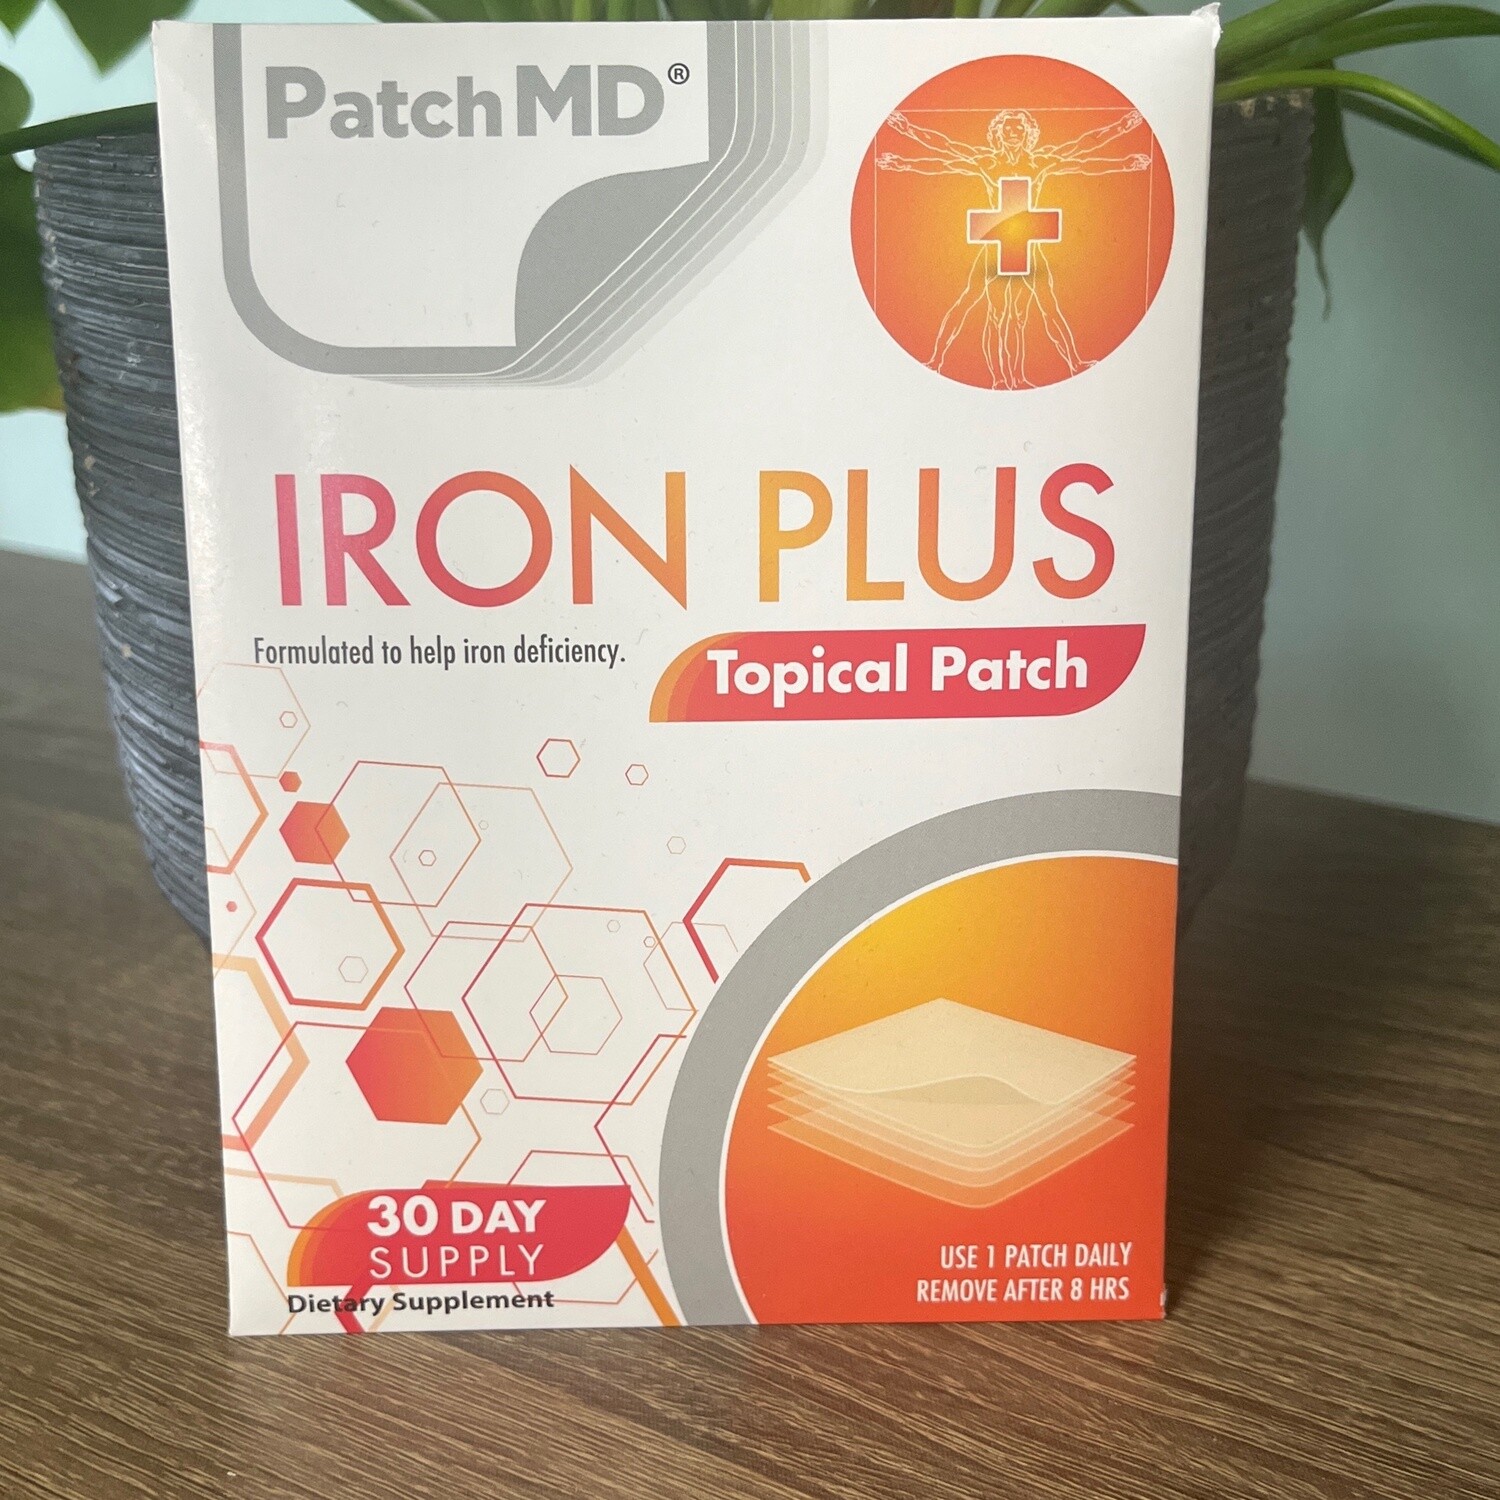 Iron Plus Topical Patch